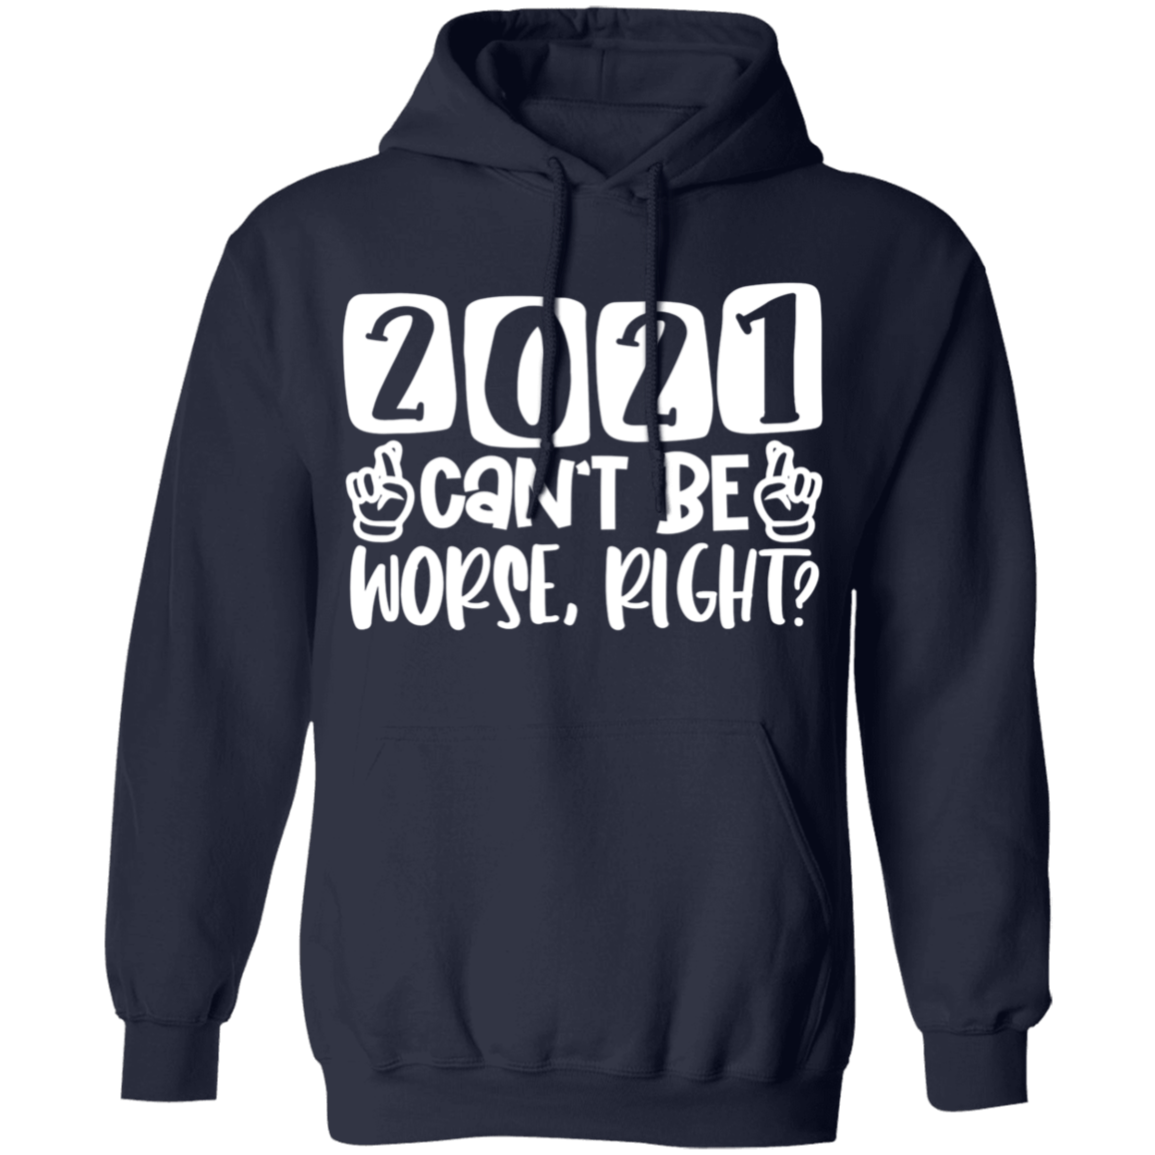 2021 Can't Be Worse Right Apparel